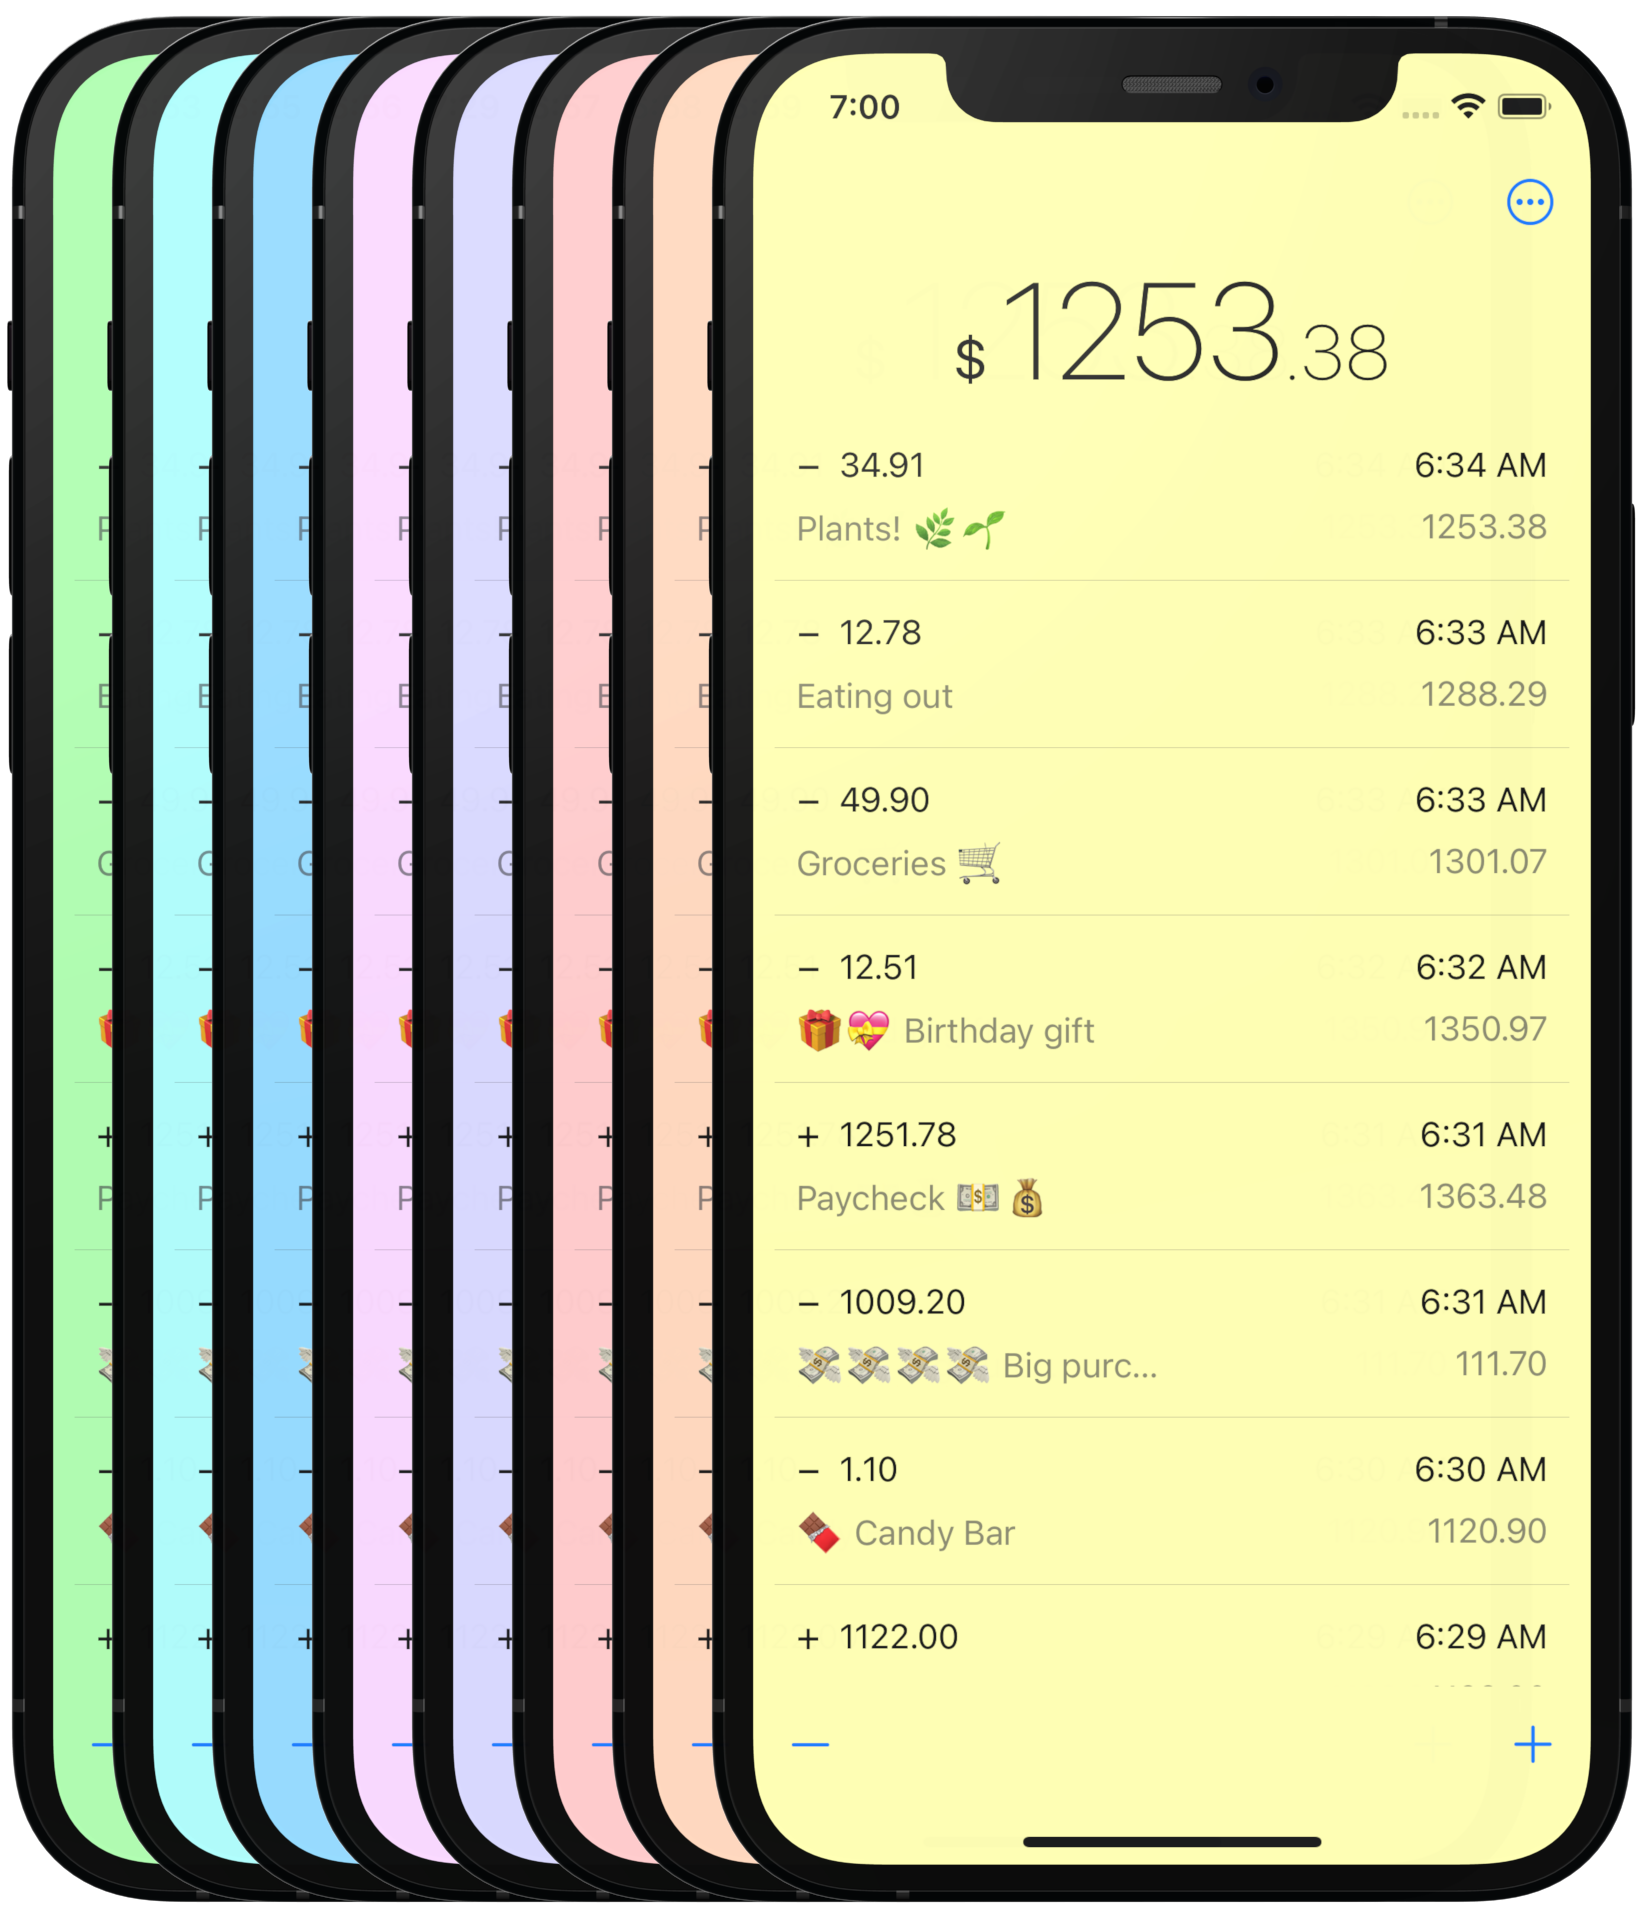 Multiple app snapshots stacked and offset. Each app snapshot in the stack has a different background color. Those colors from left to right: pastel green, pastel red, baby blue, and a pastel yellow.